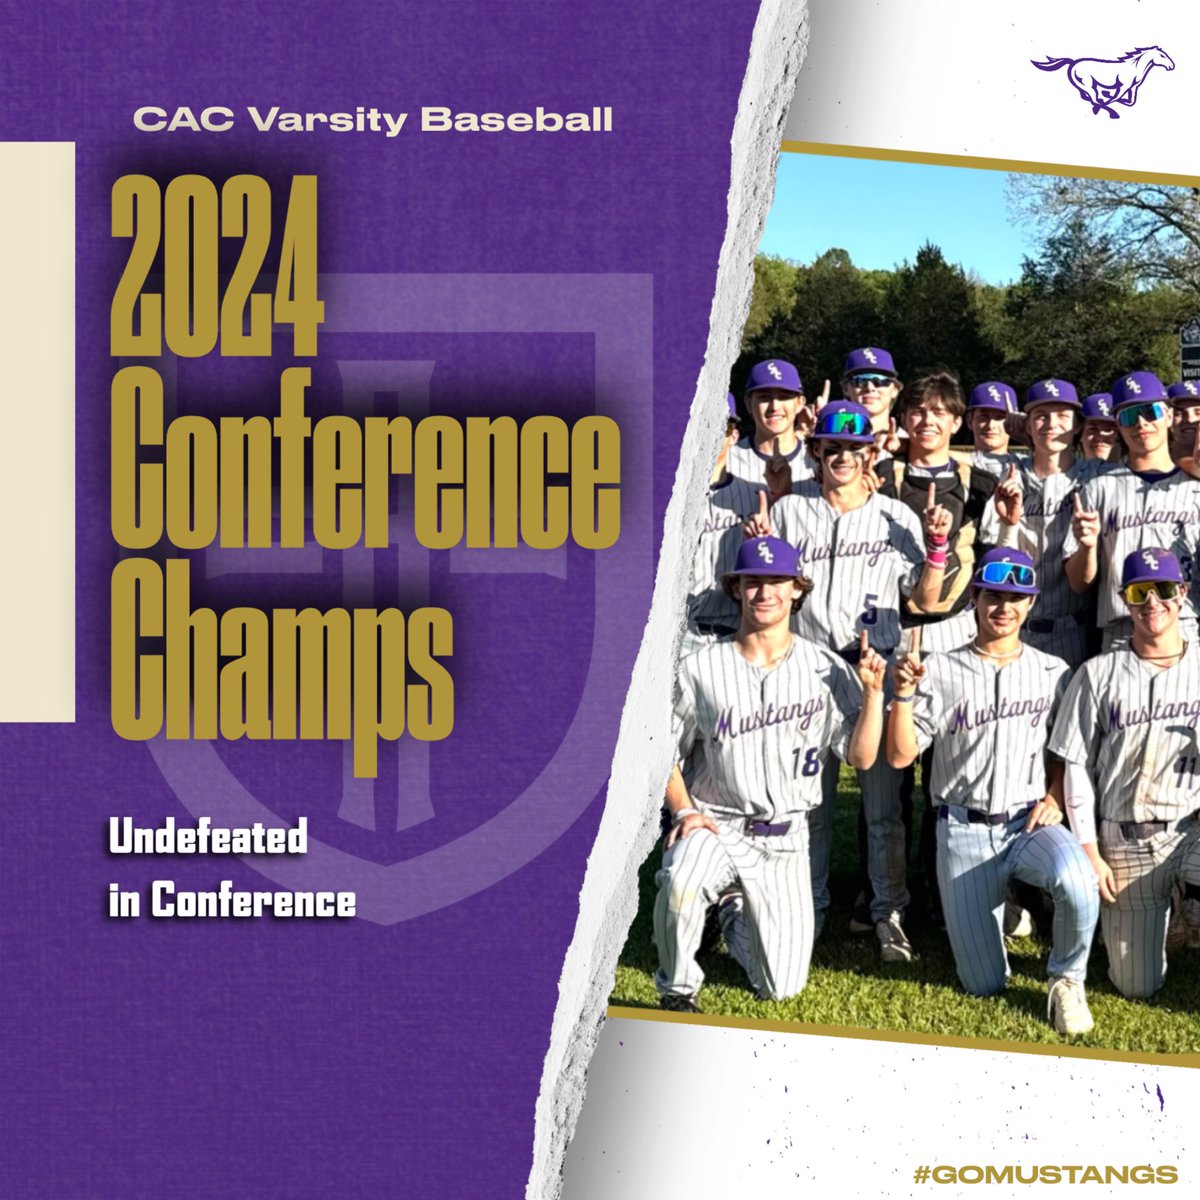 CAC defeats Dover 11-0. We are the undefeated conference champions of 3A-5. Let’s keep it going.